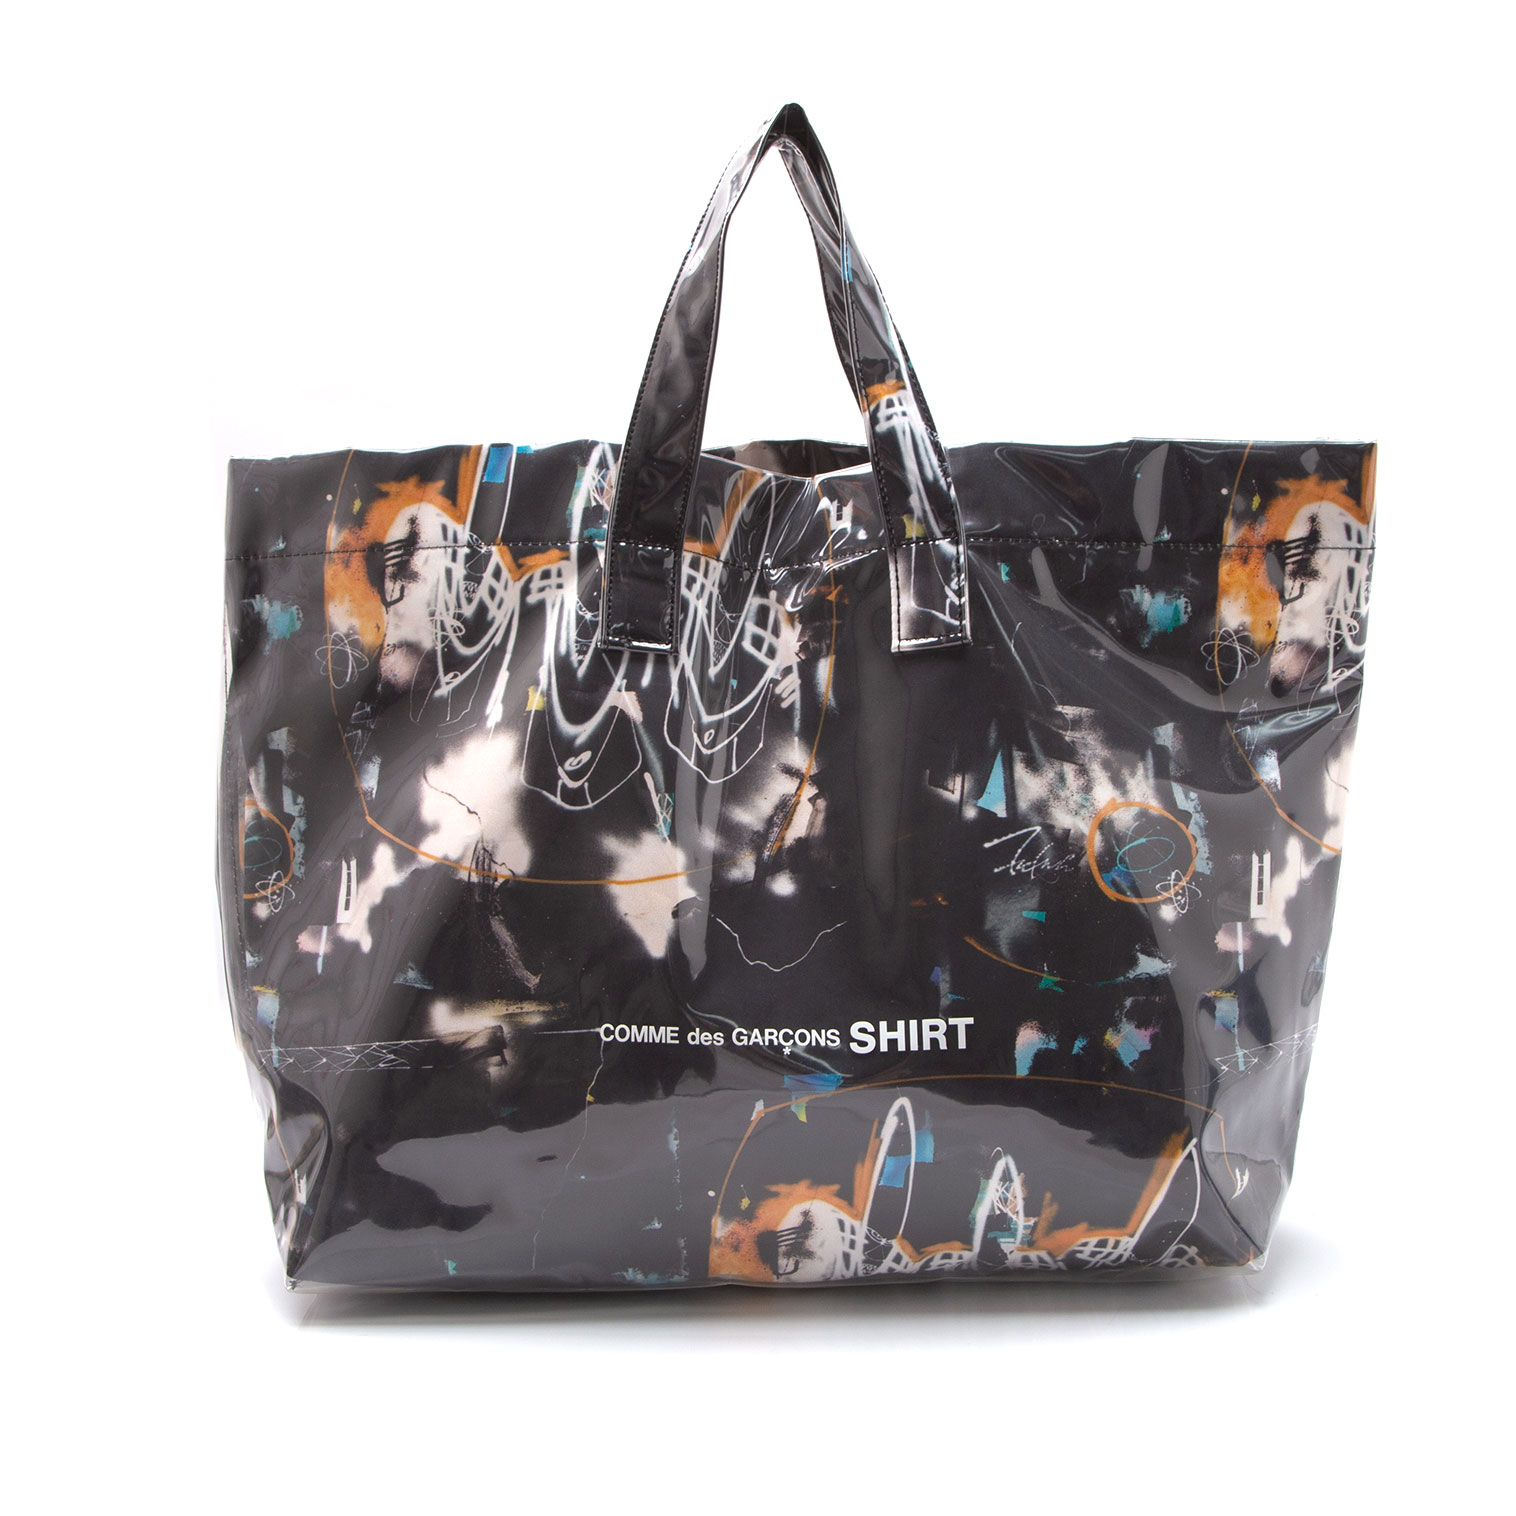 COMME des GARCONS SHIRT コムデギャルソンシャツ 20AW Tote Bag With FUTURA Print グラフィックプリントトートバッグ ミックスカラー